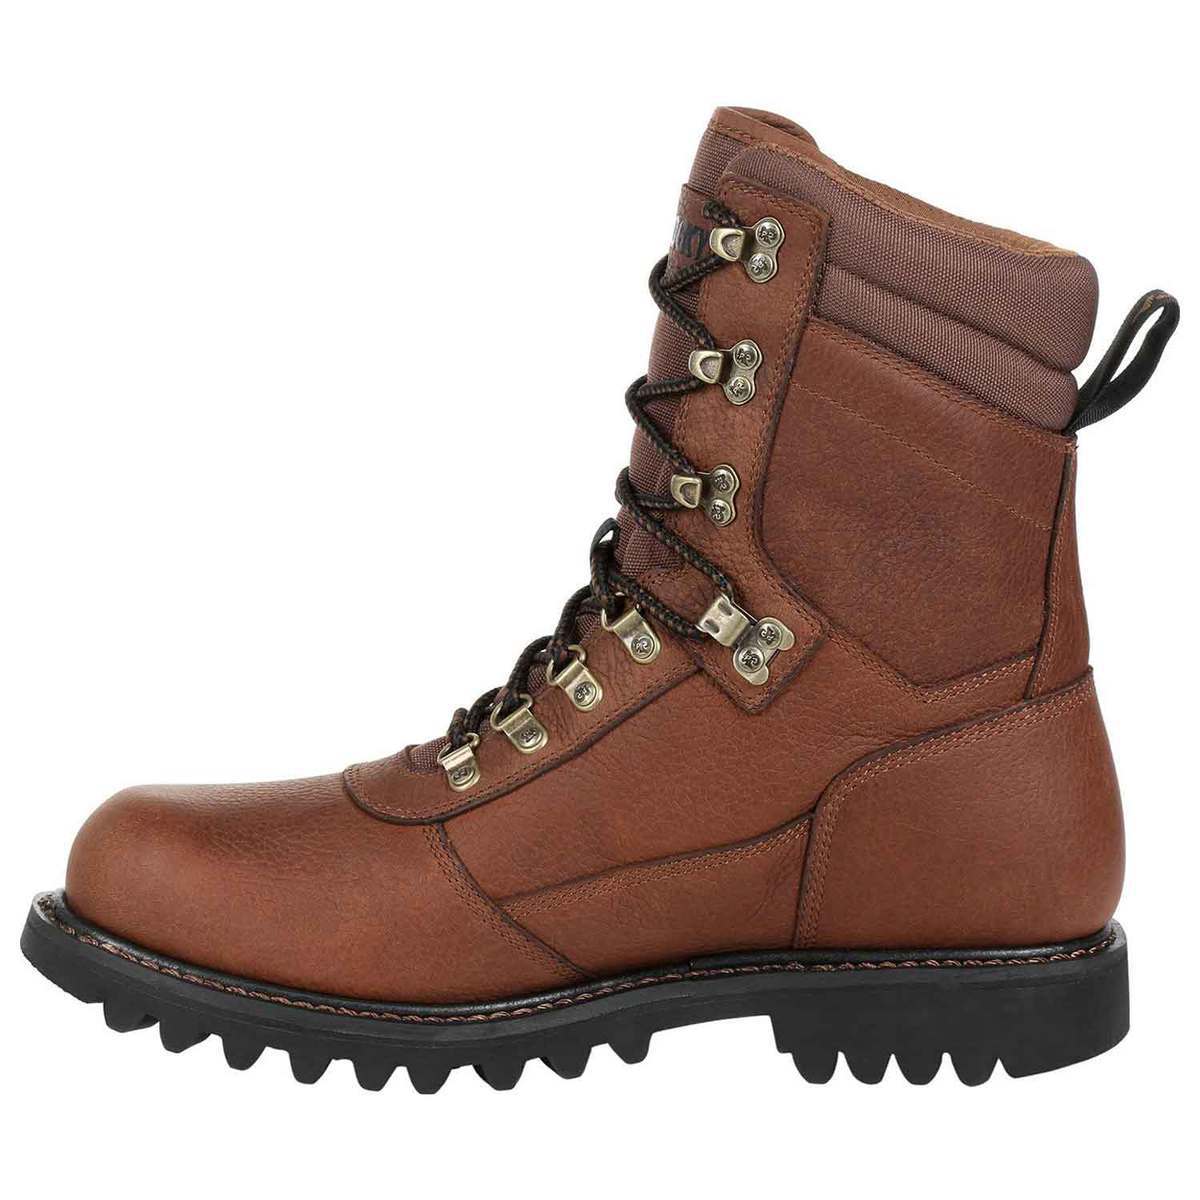 Rocky Men's Ranger Insulated Waterproof Hunting Boots - Brown - Size 11 ...